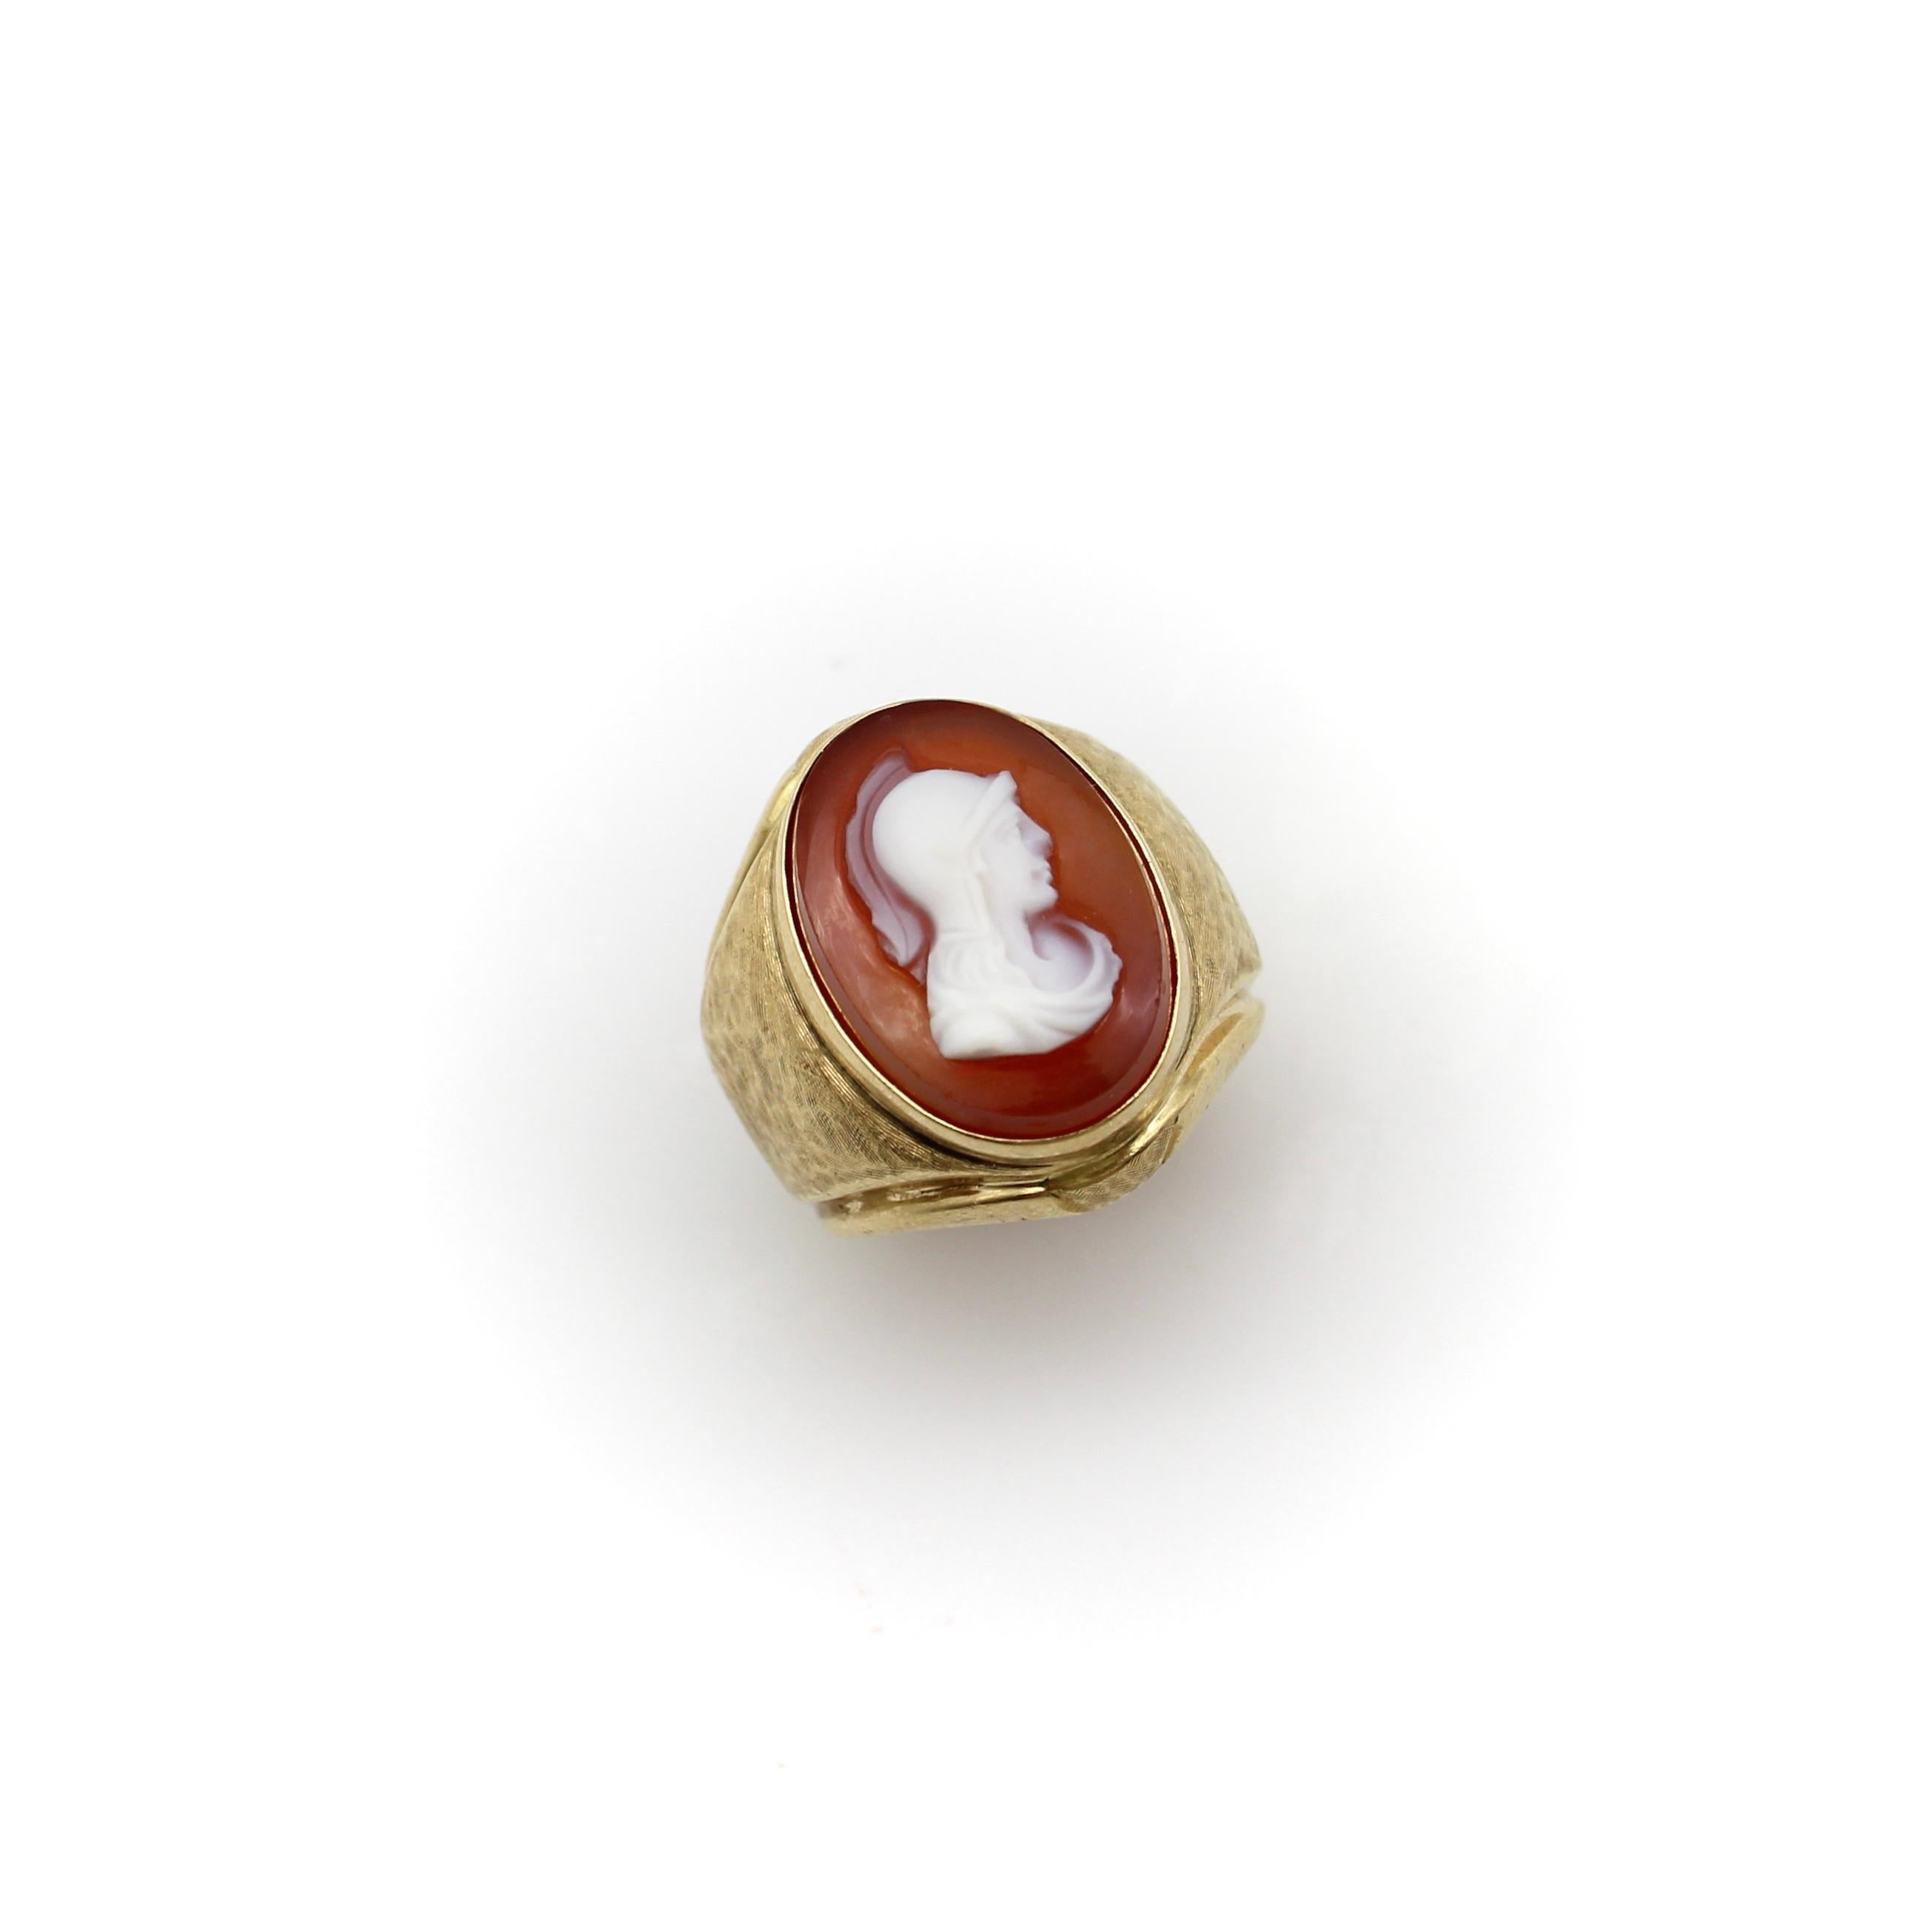 This beautiful Victorian 14k gold cameo ring, circa the turn of the century, features the profile of a helmeted warrior carved out of red sardonyx. The top layer of the stone, where the warrior is carved in incredible detail, is a creamy white,